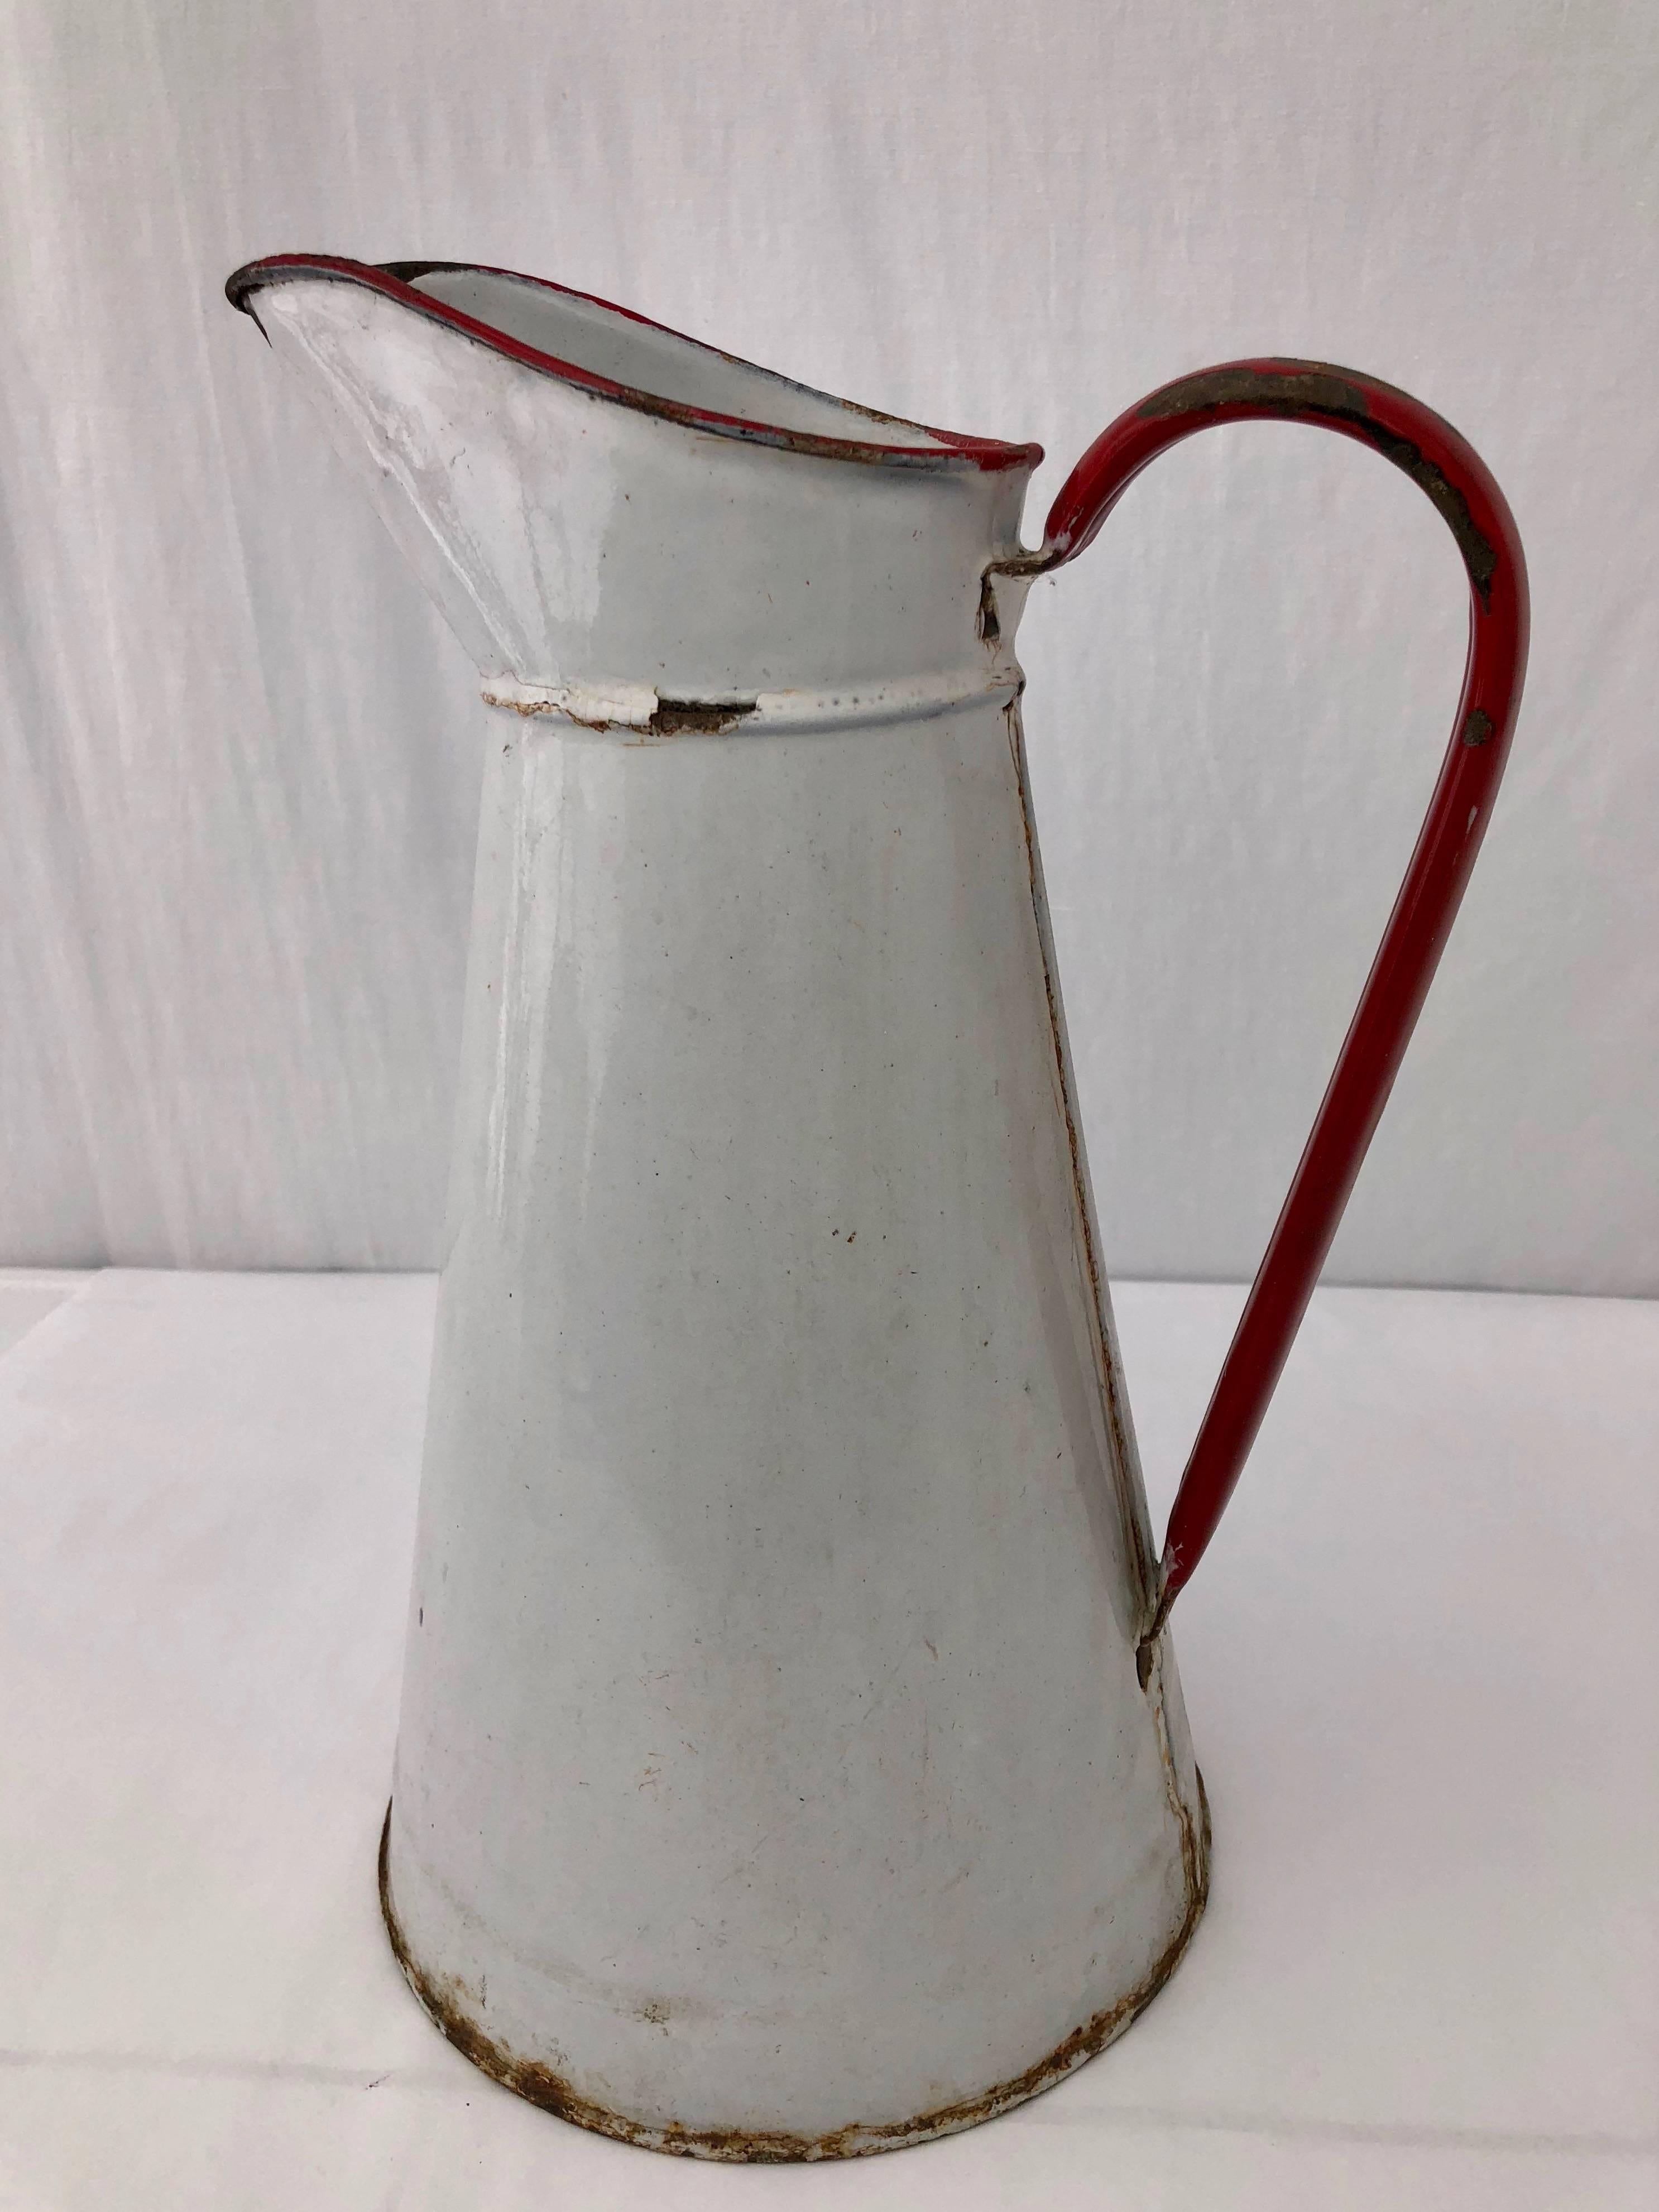 Vintage French Enamelware Large Pitcher, White With Red Handle In Fair Condition For Sale In Petaluma, CA